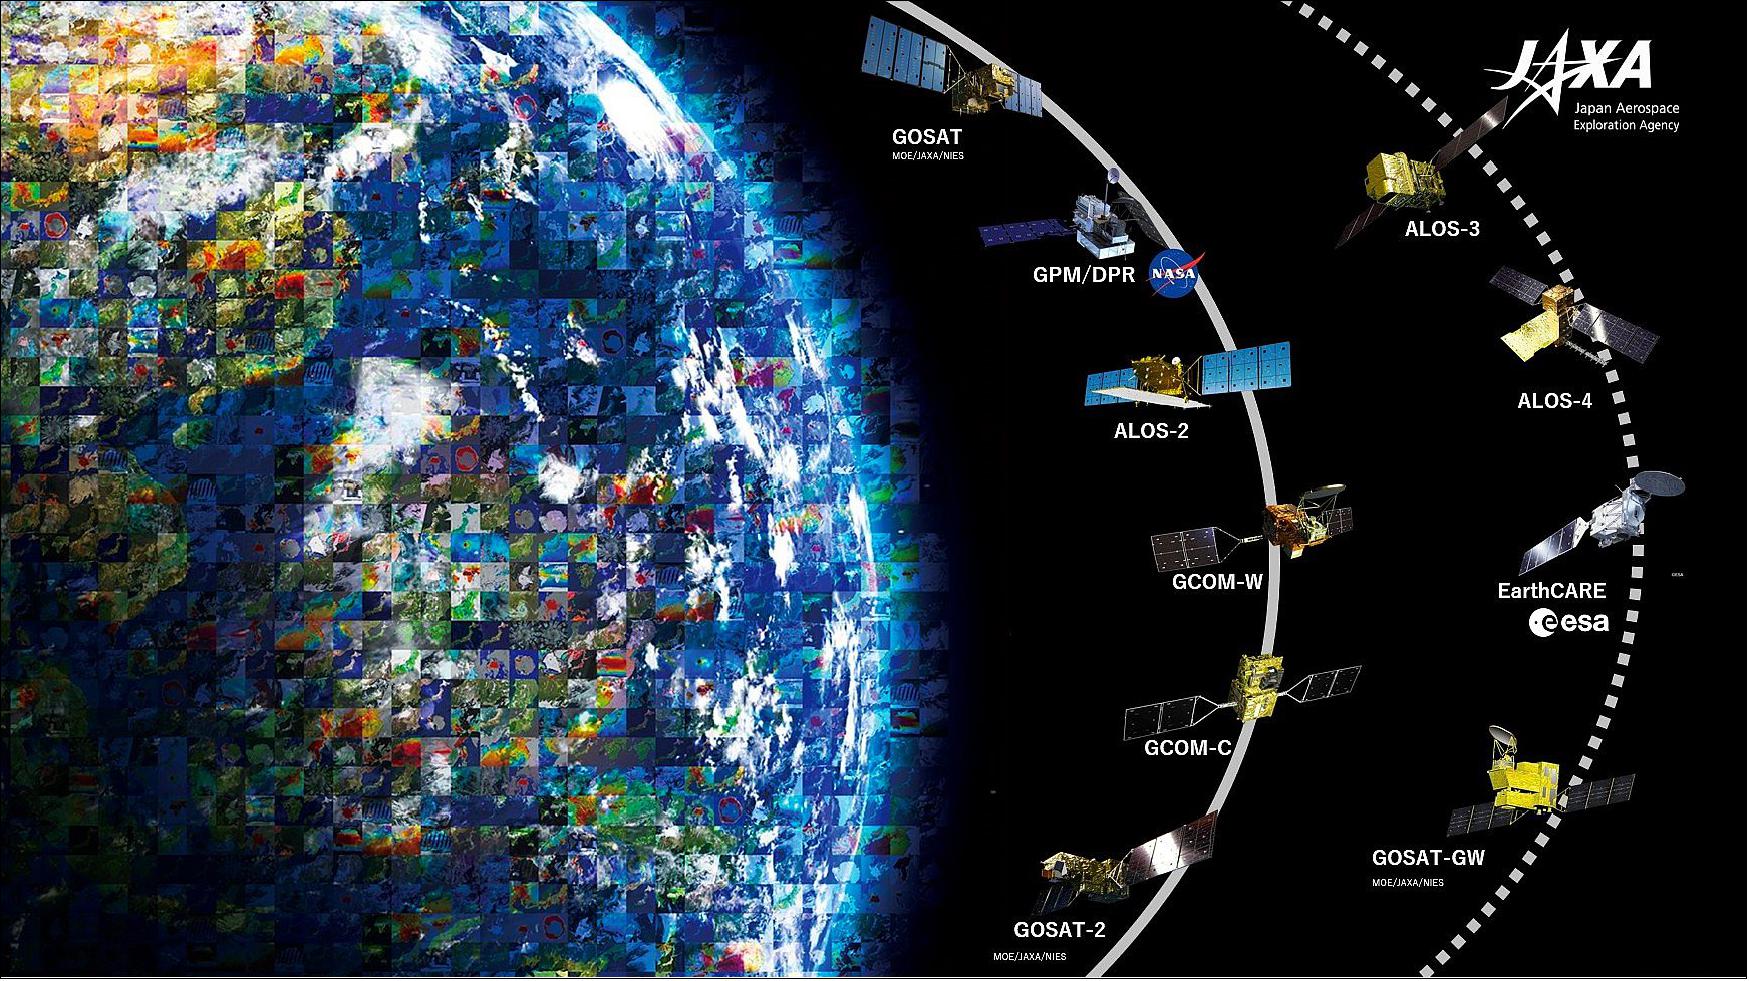 Figure 10: JAXA’s Earth-observing satellite fleet allows us to monitor a variety of physical parameters on Earth's surface and atmosphere globally and periodically (image credit: JAXA, Koji Terada)